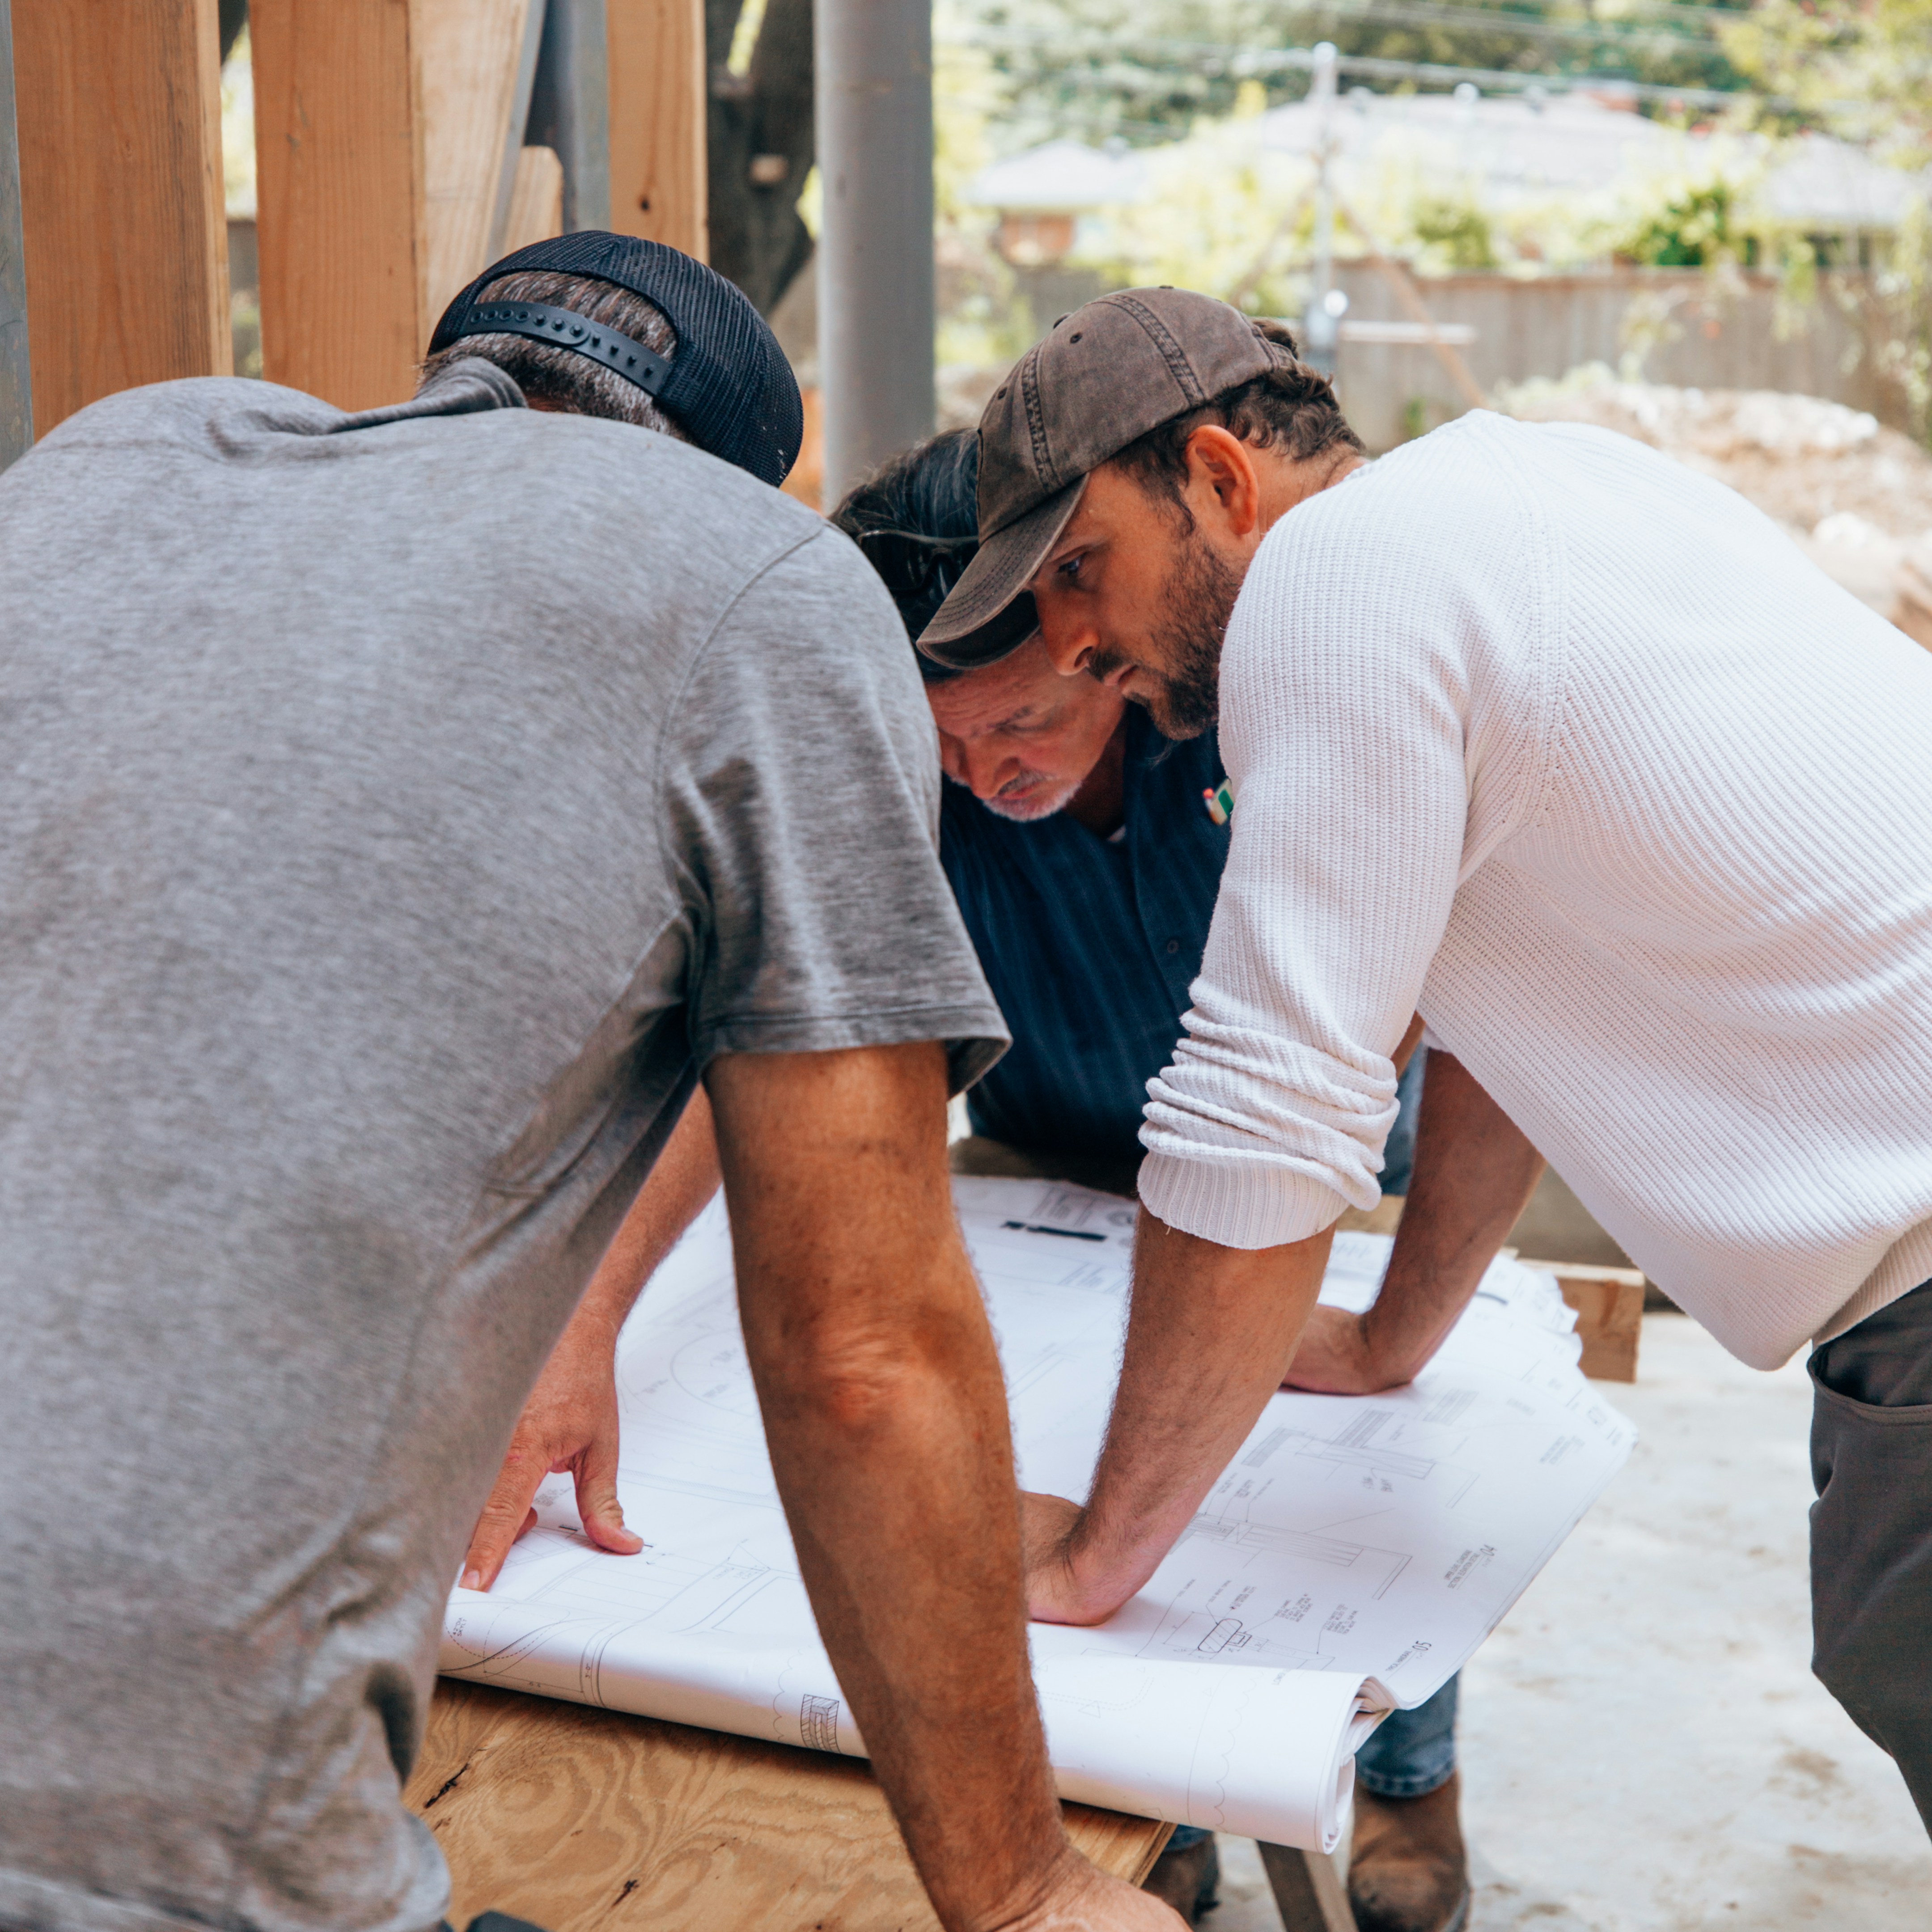 a group of men working on a project